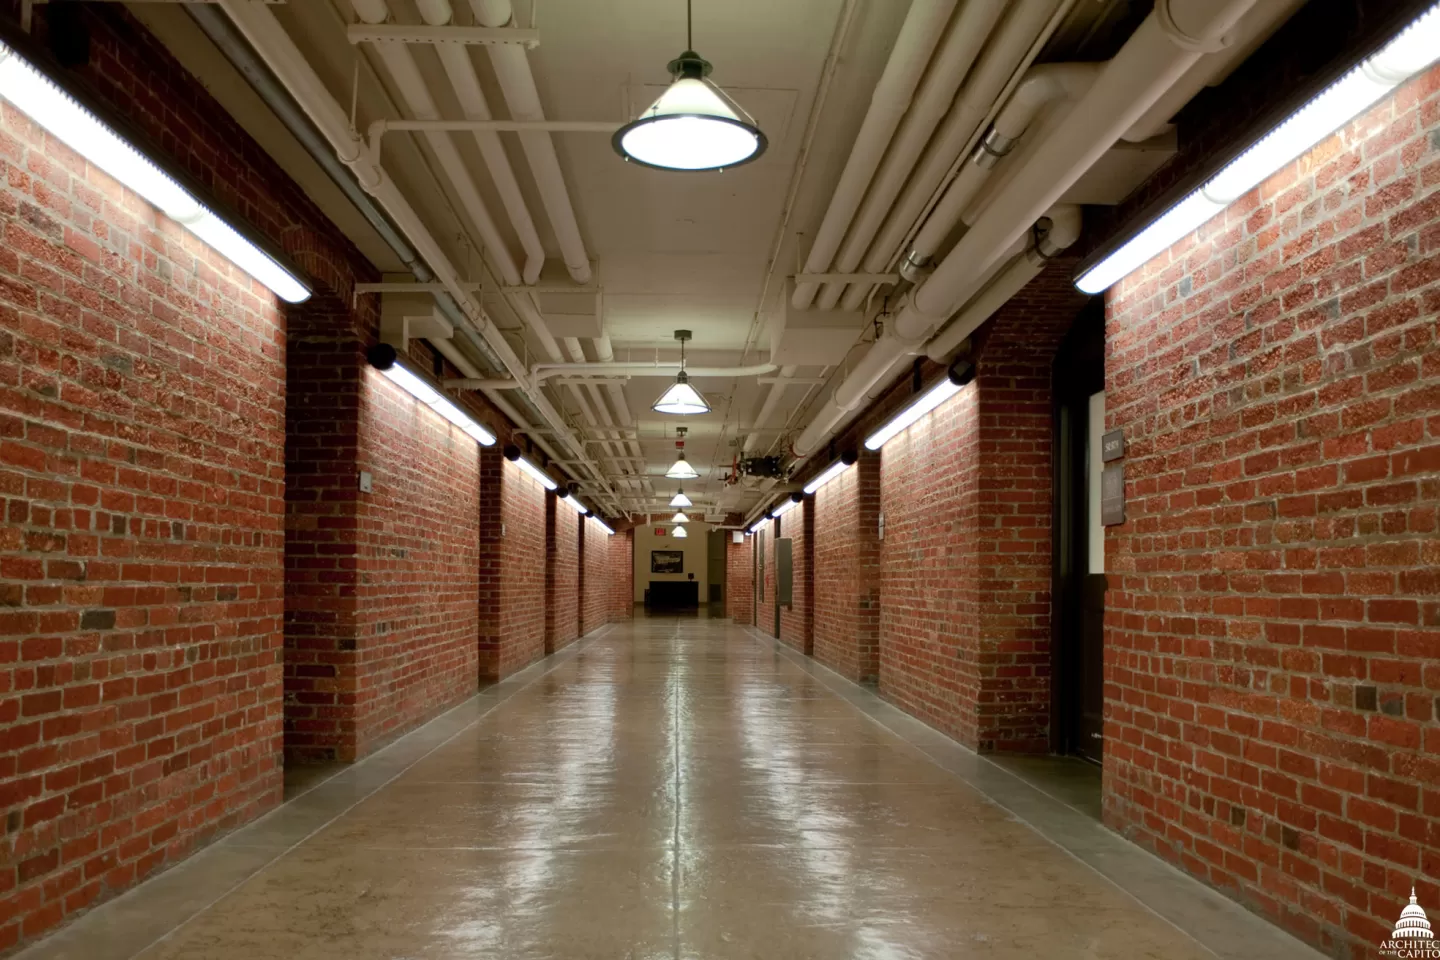 A basement corridor in the Russell Senate Office Building.